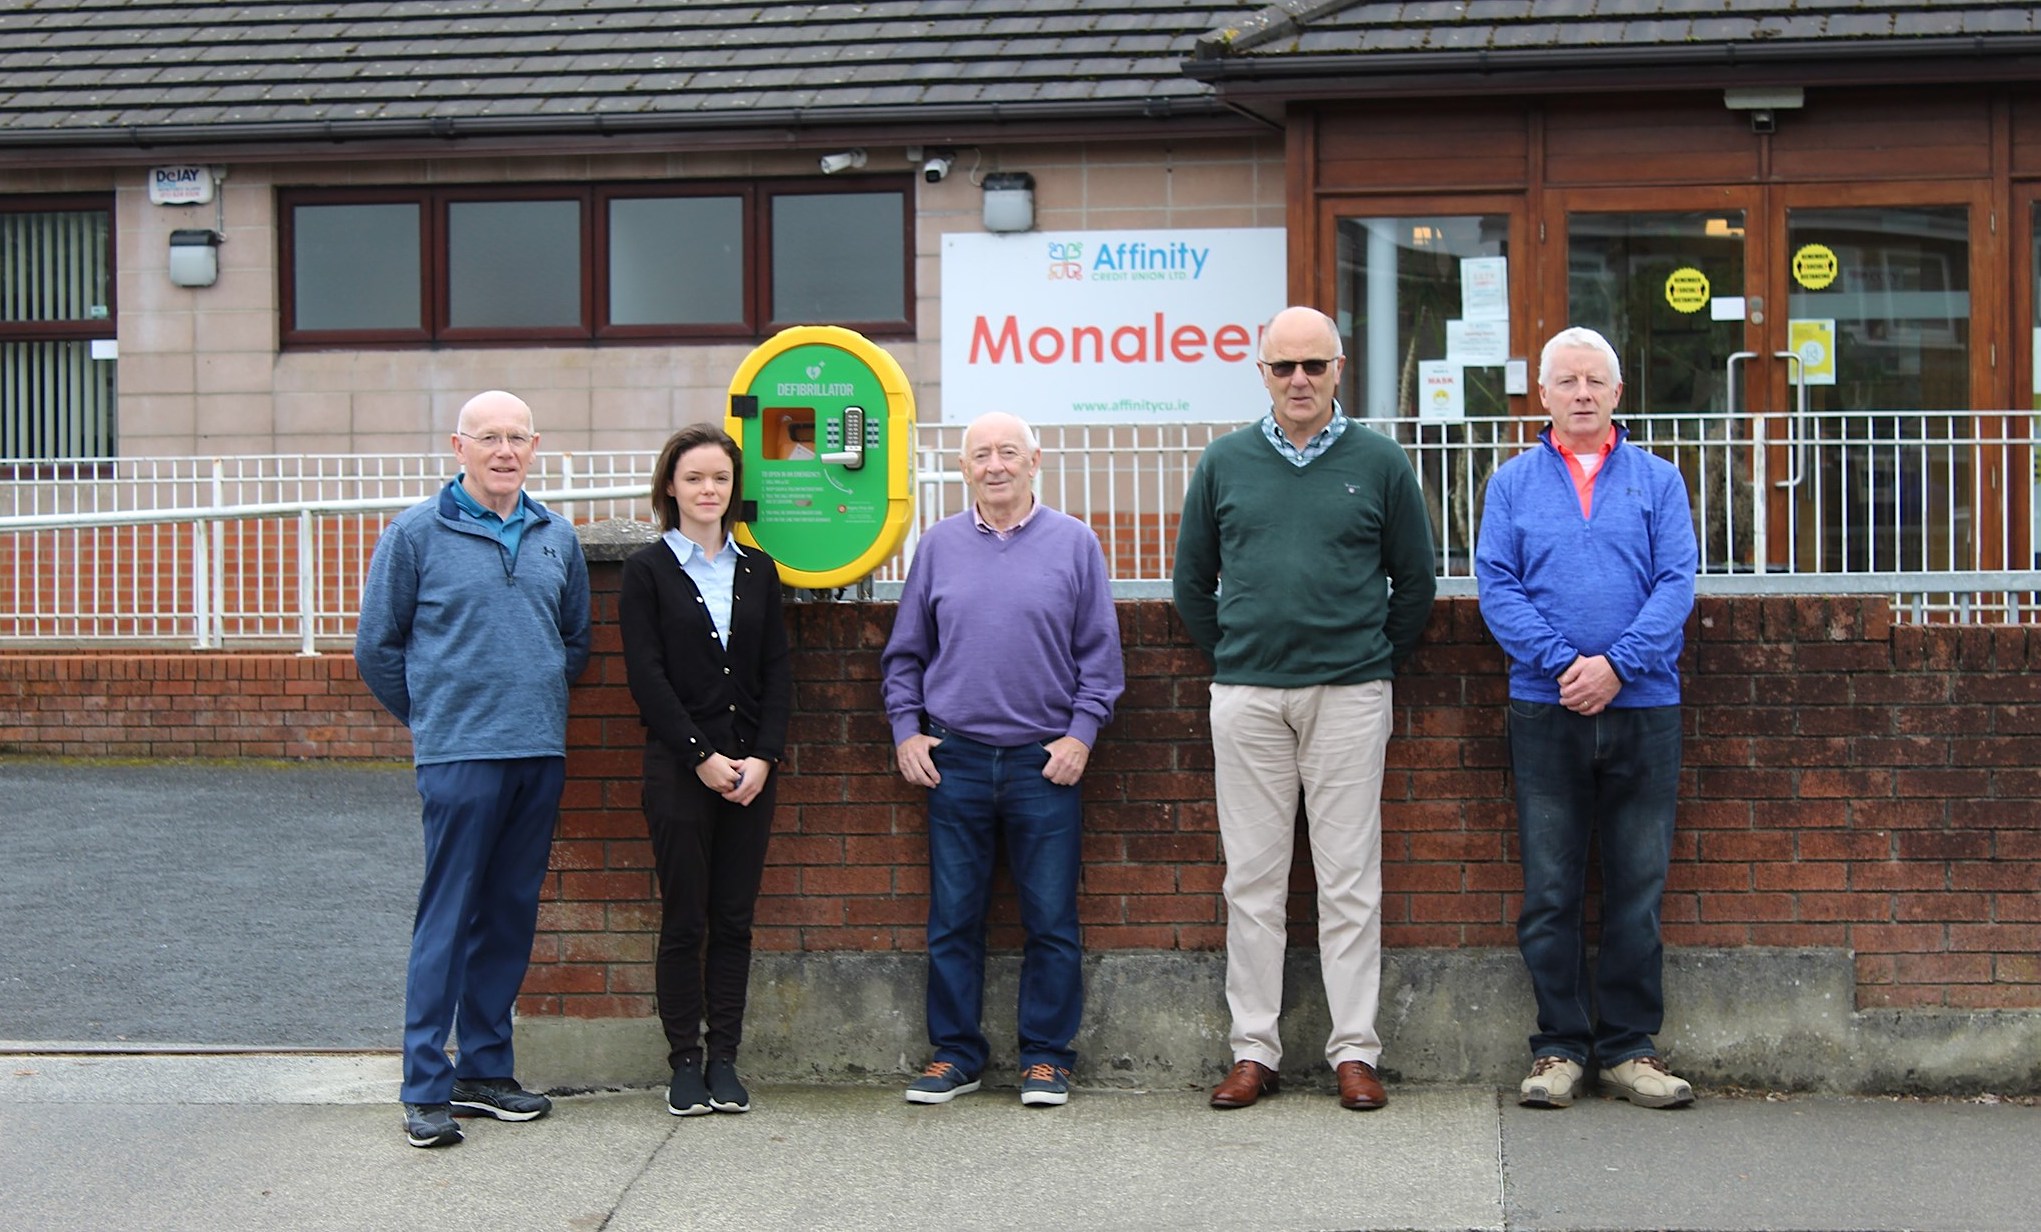 Monaleen Park Residents Association Defibrillator - Pictured above is Peter Clifford, Monaleen Park RA; Lydia D'Arcy, Affinity CU; Danny Browne, Monaleen Park RA; Kevin Haugh, Monaleen Park RA and Noel Power, Monaleen Park at the defibrillator at Affinity Credit Union